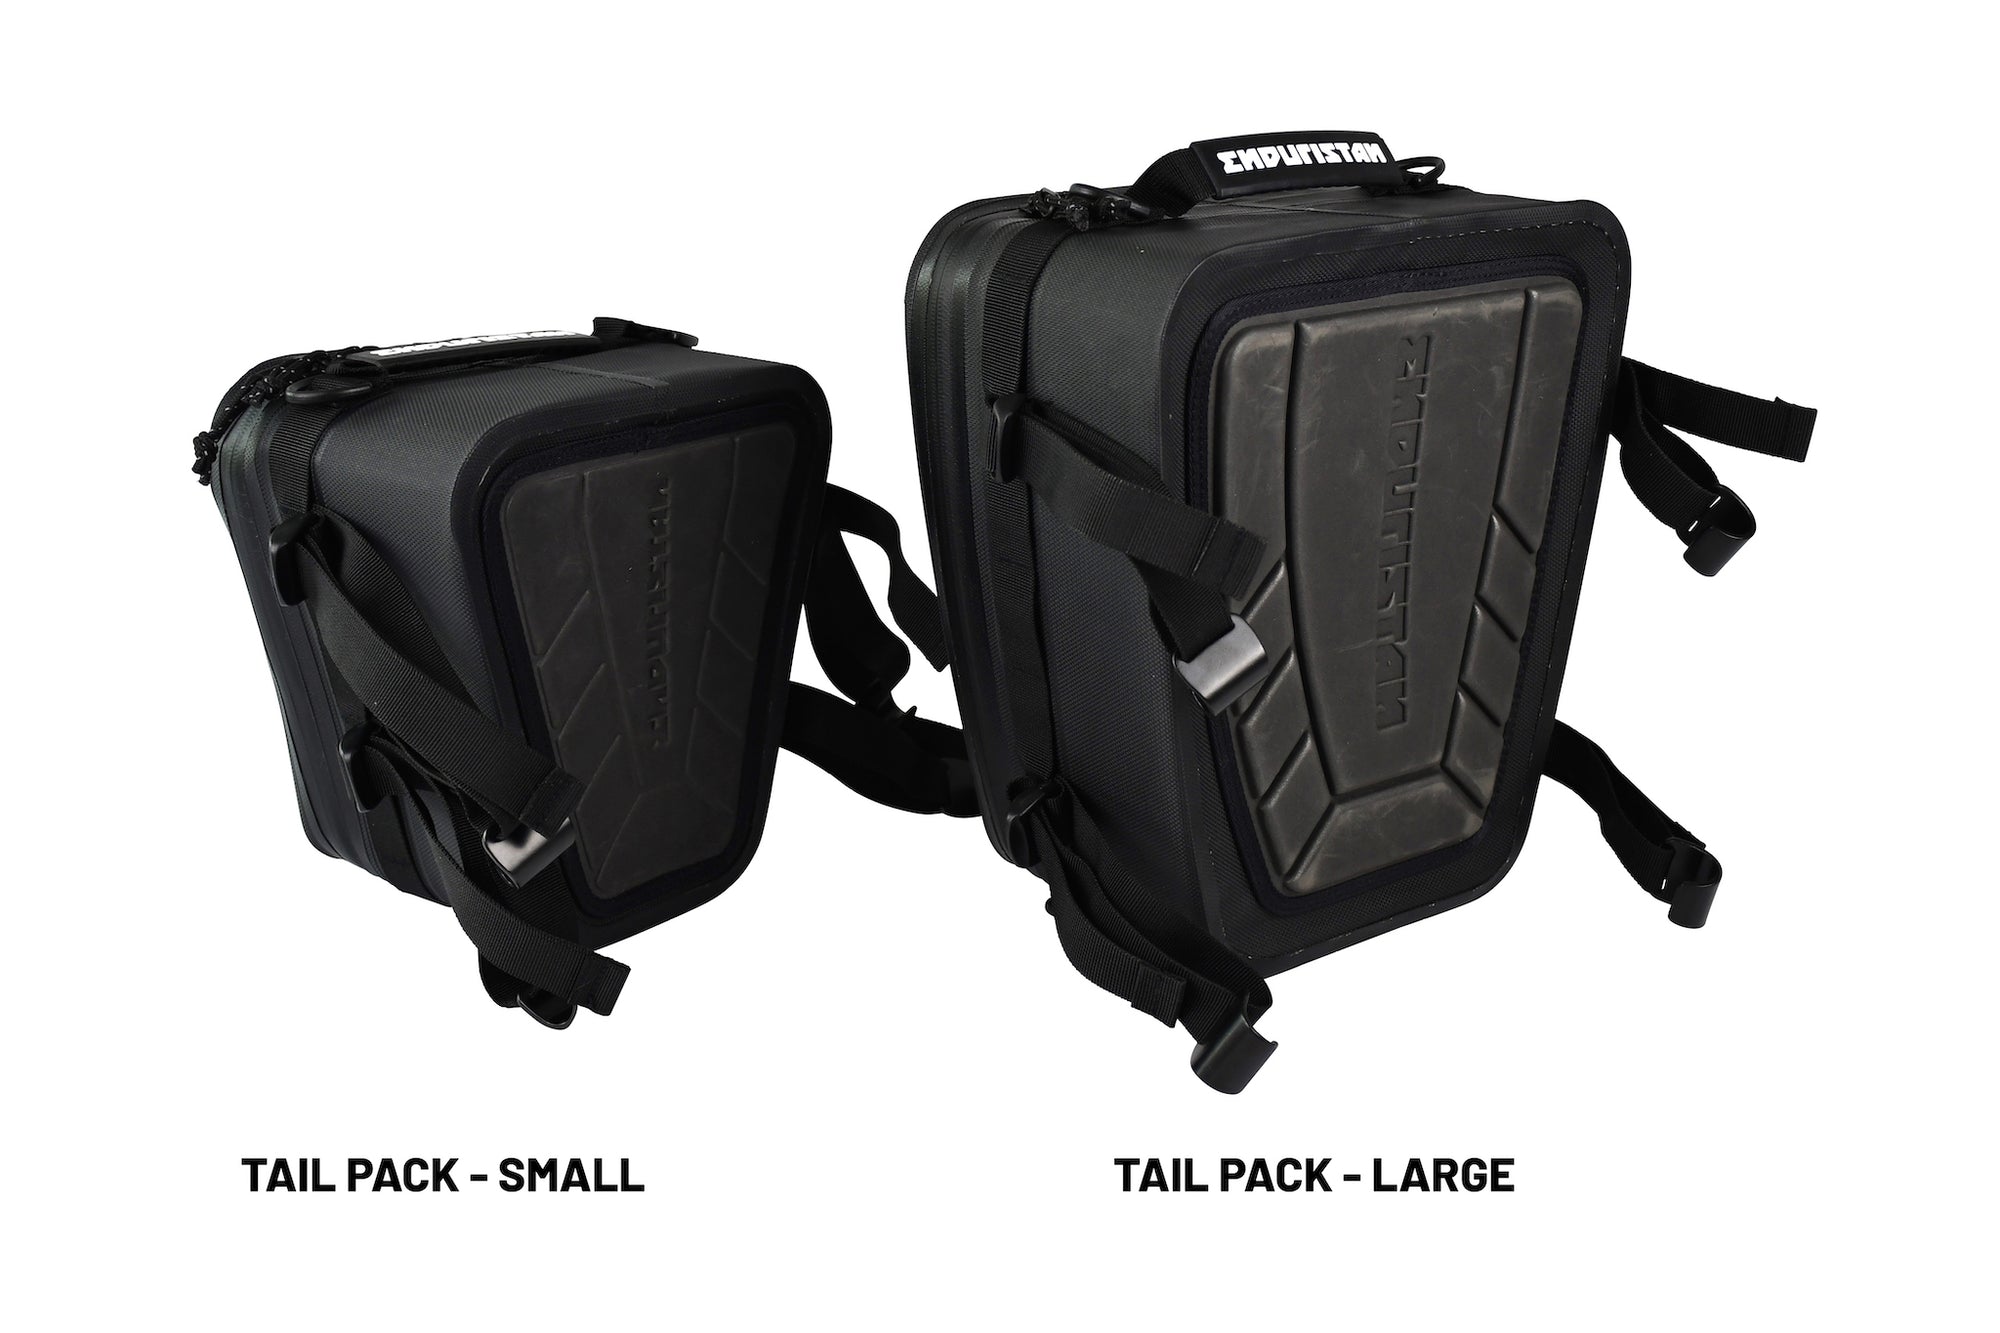 Tail Pack Small